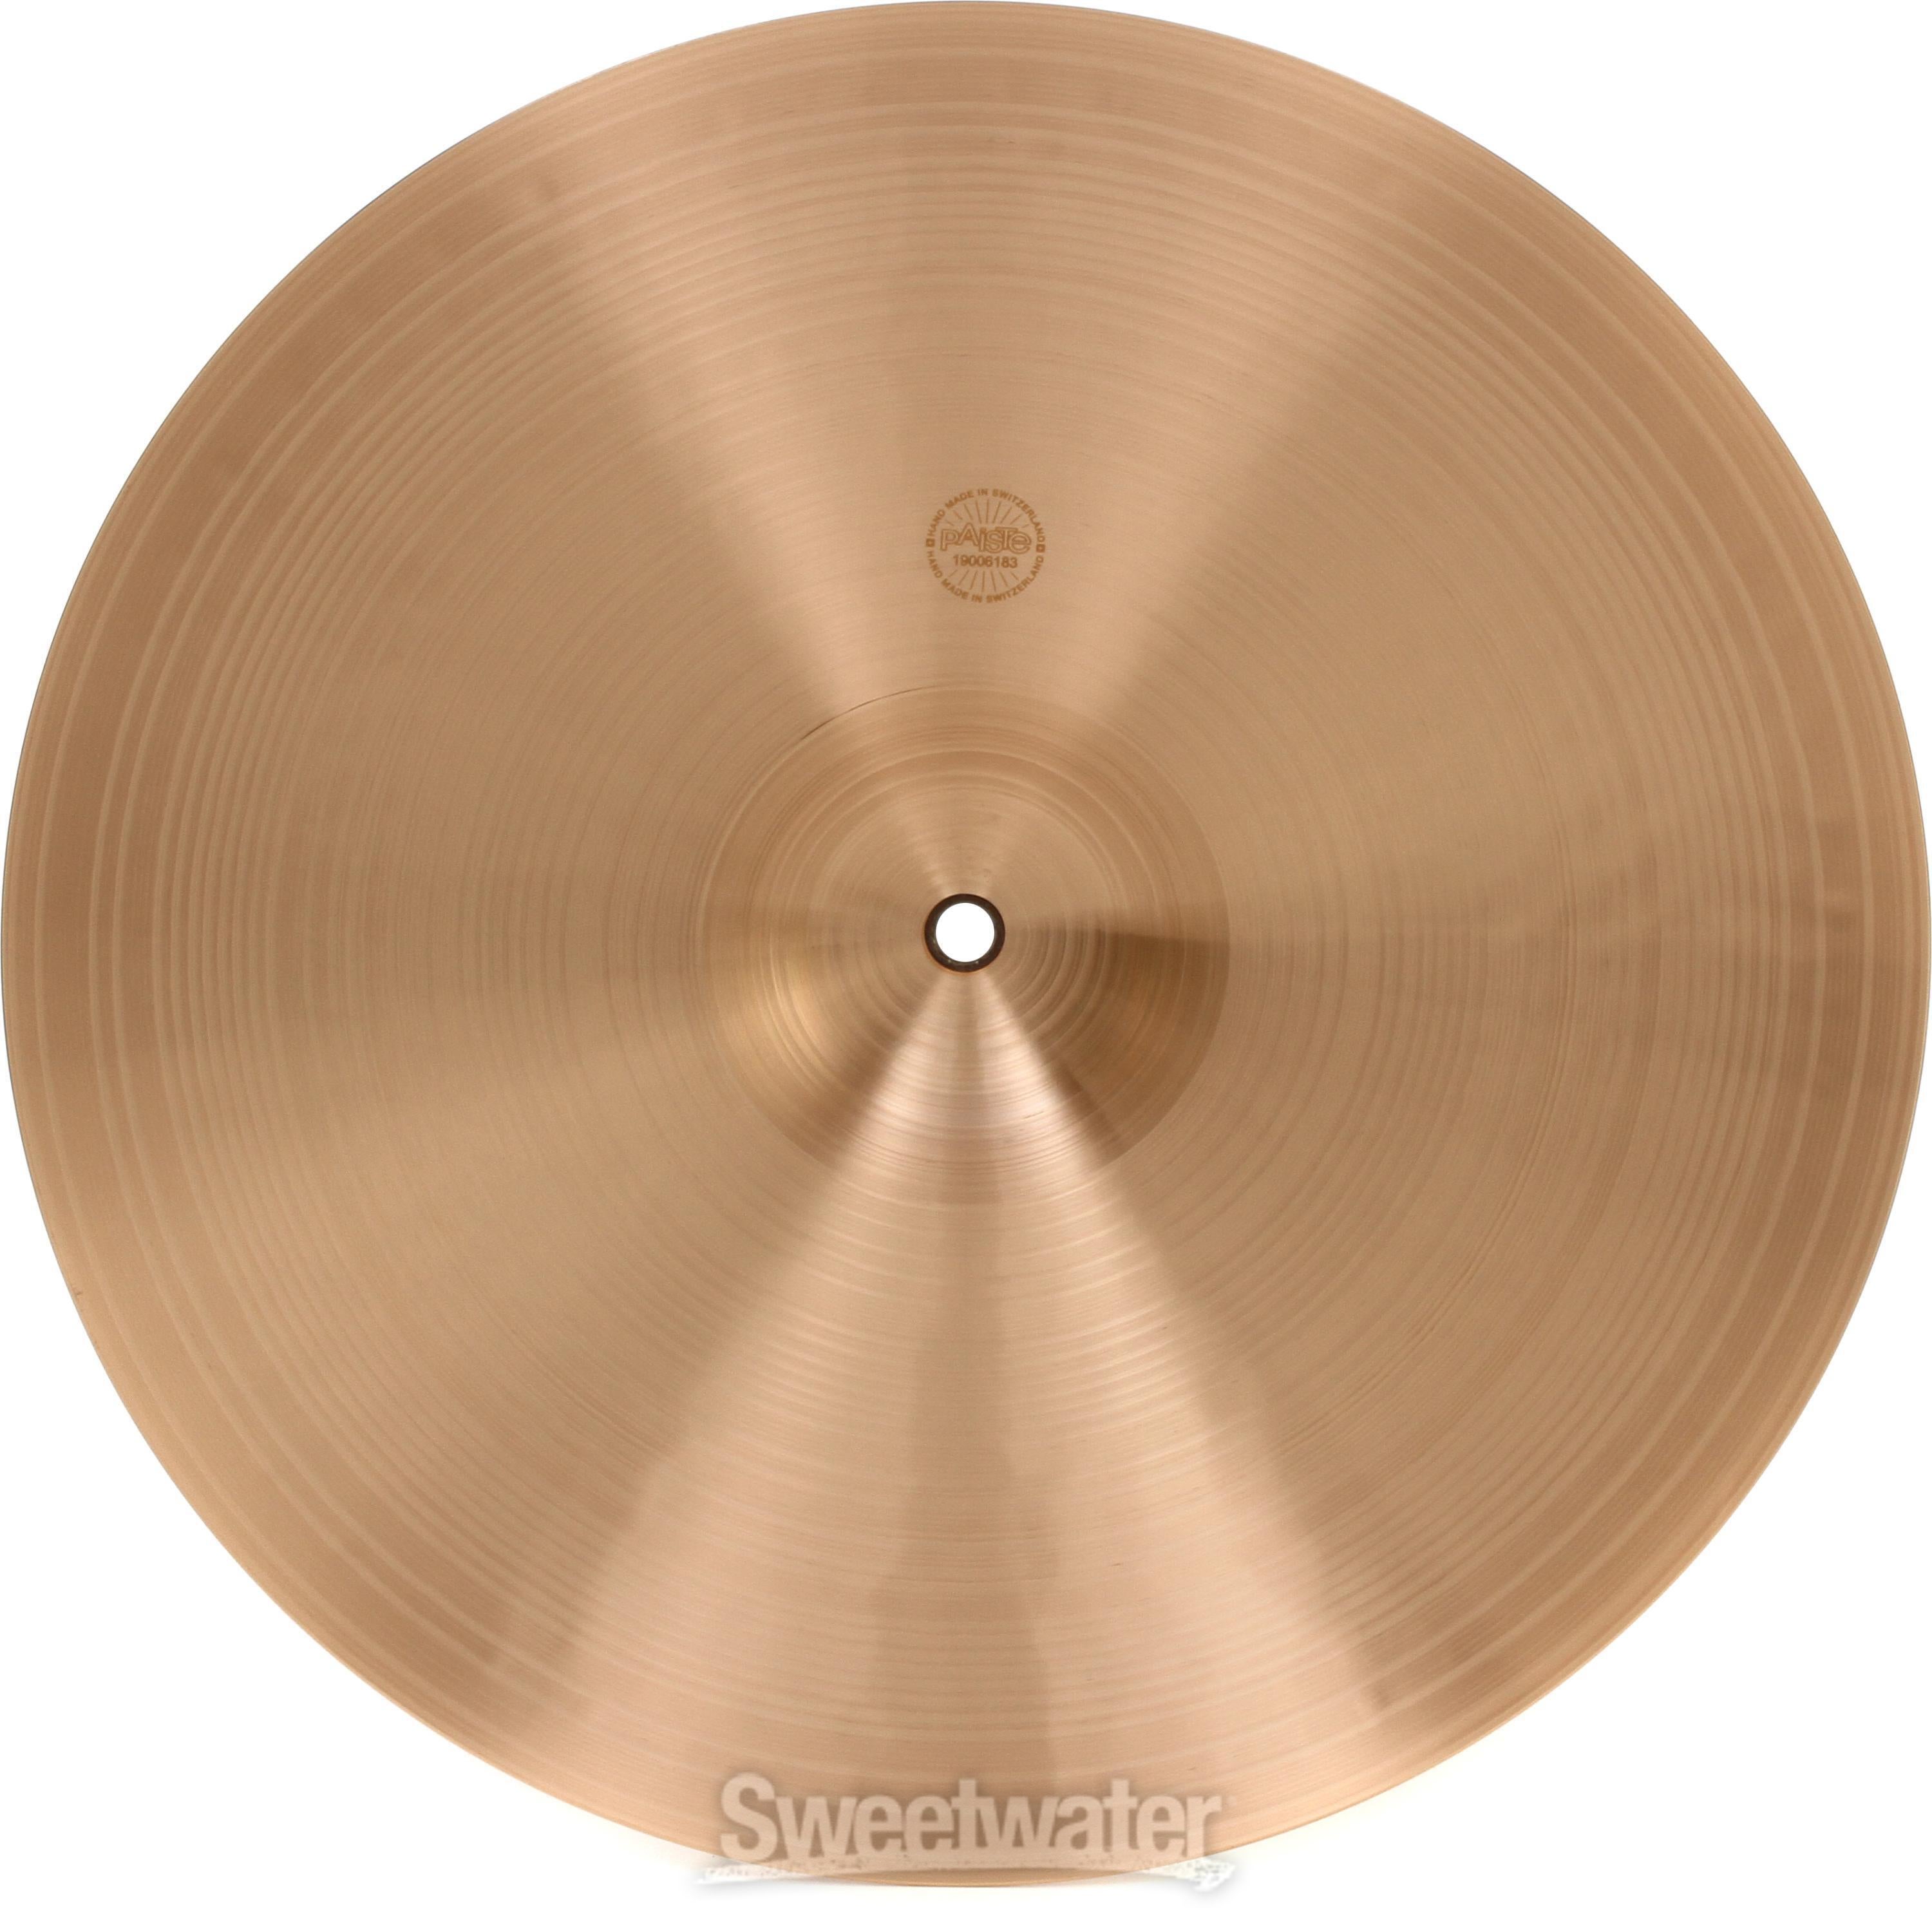 Paiste 15 inch 2002 Sound Edge Hi-hat Top Cymbal | Sweetwater